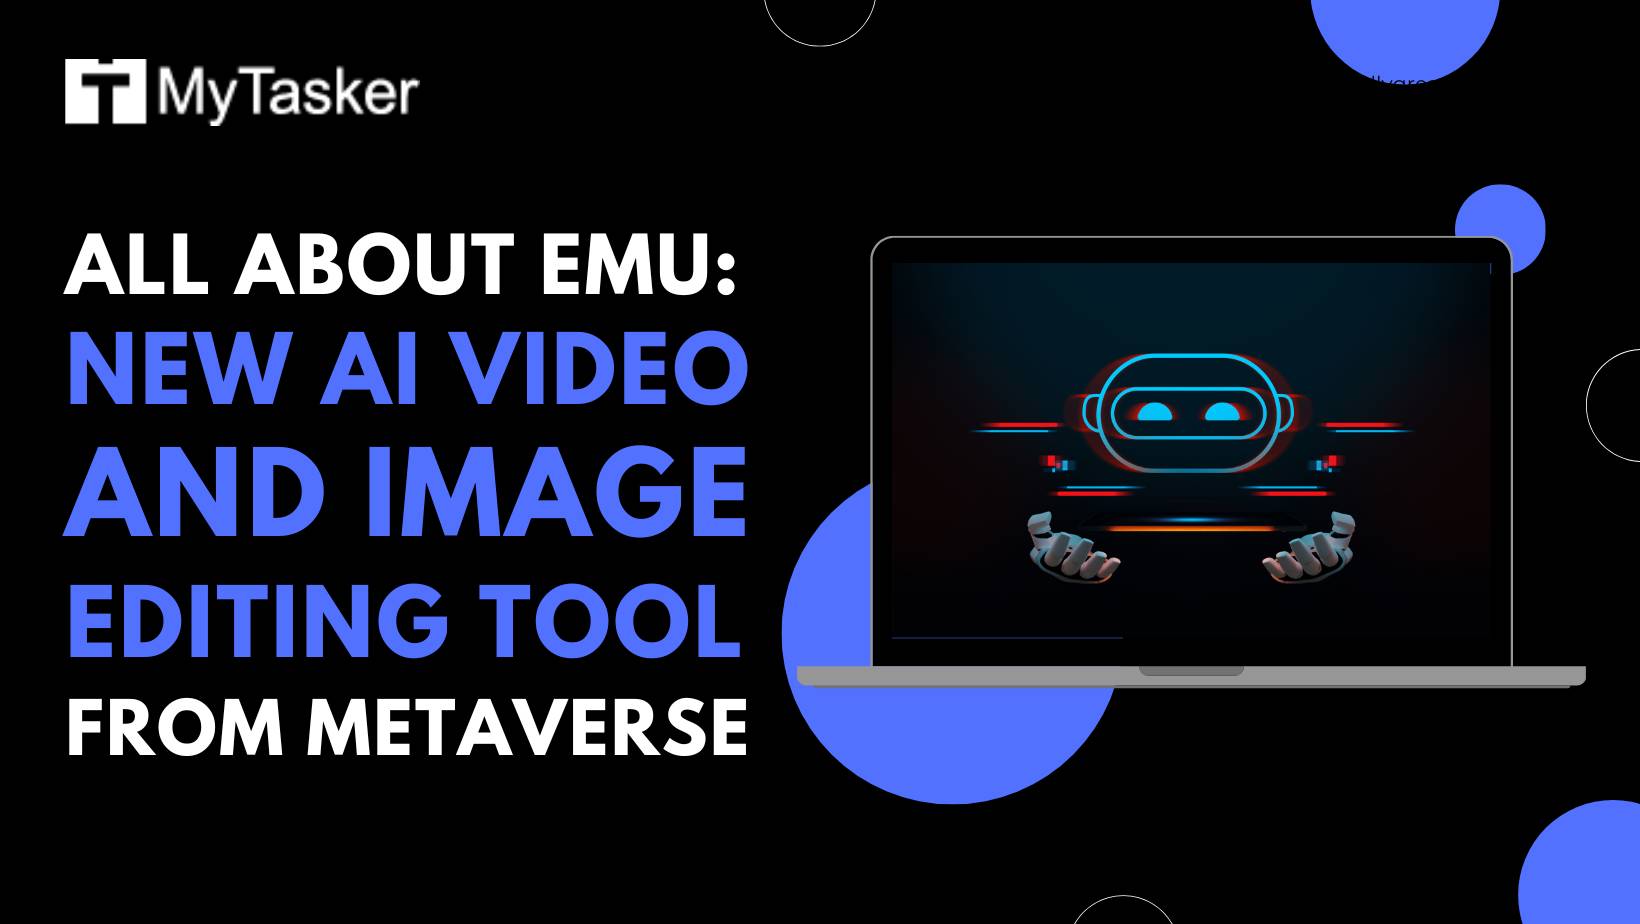 All About EMU: New AI Video and Image Editing Tool From Metaverse 